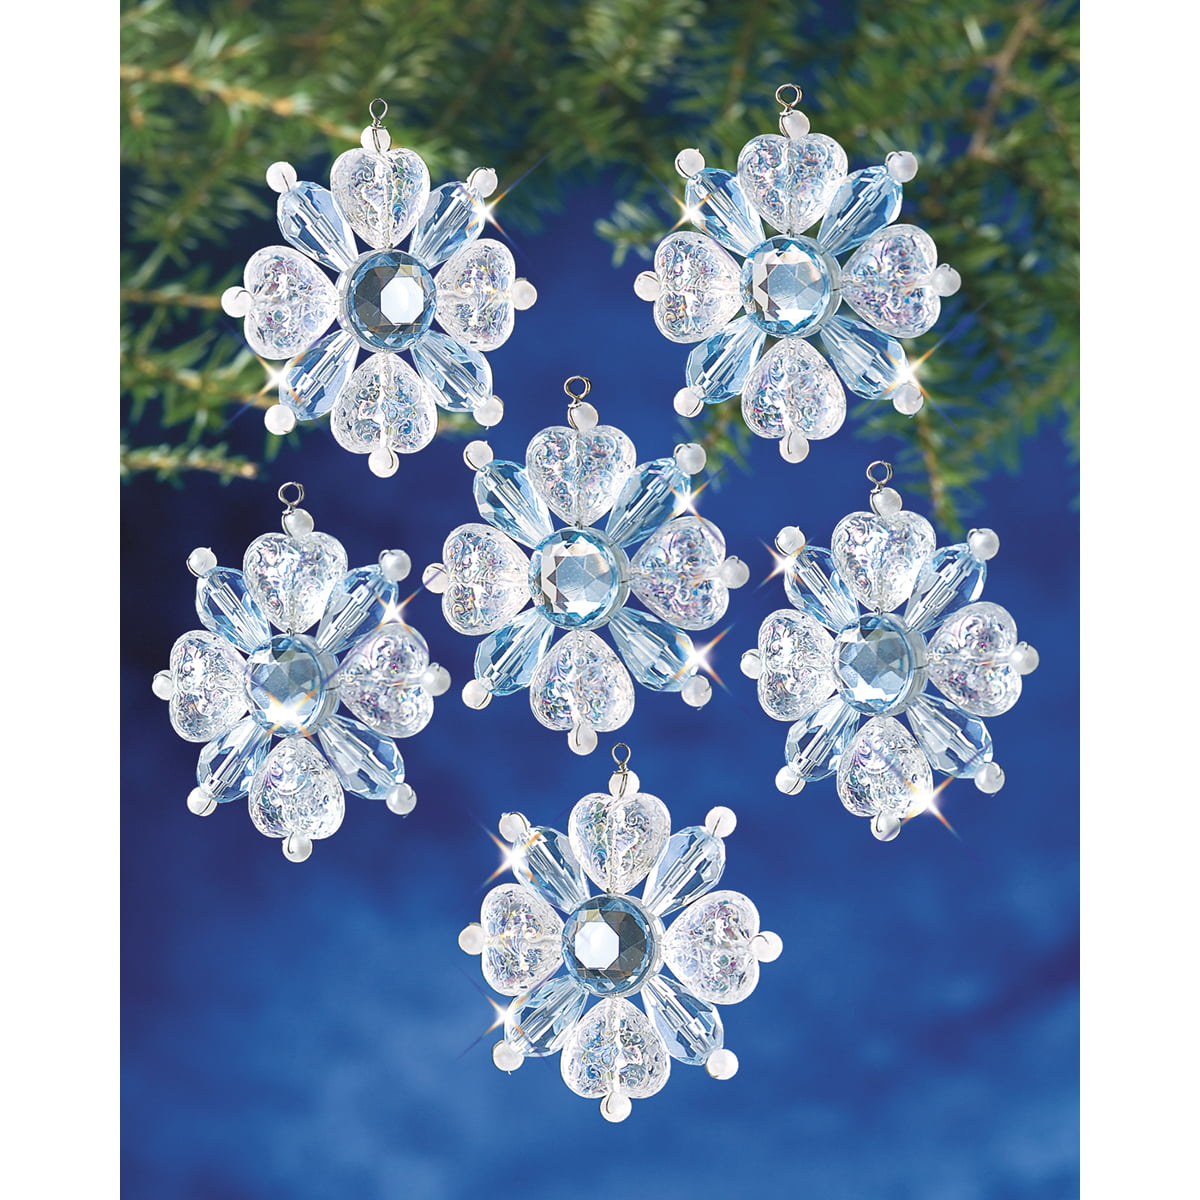 Holiday Beaded Ornament Kit-Faceted Snowflake Makes 4 